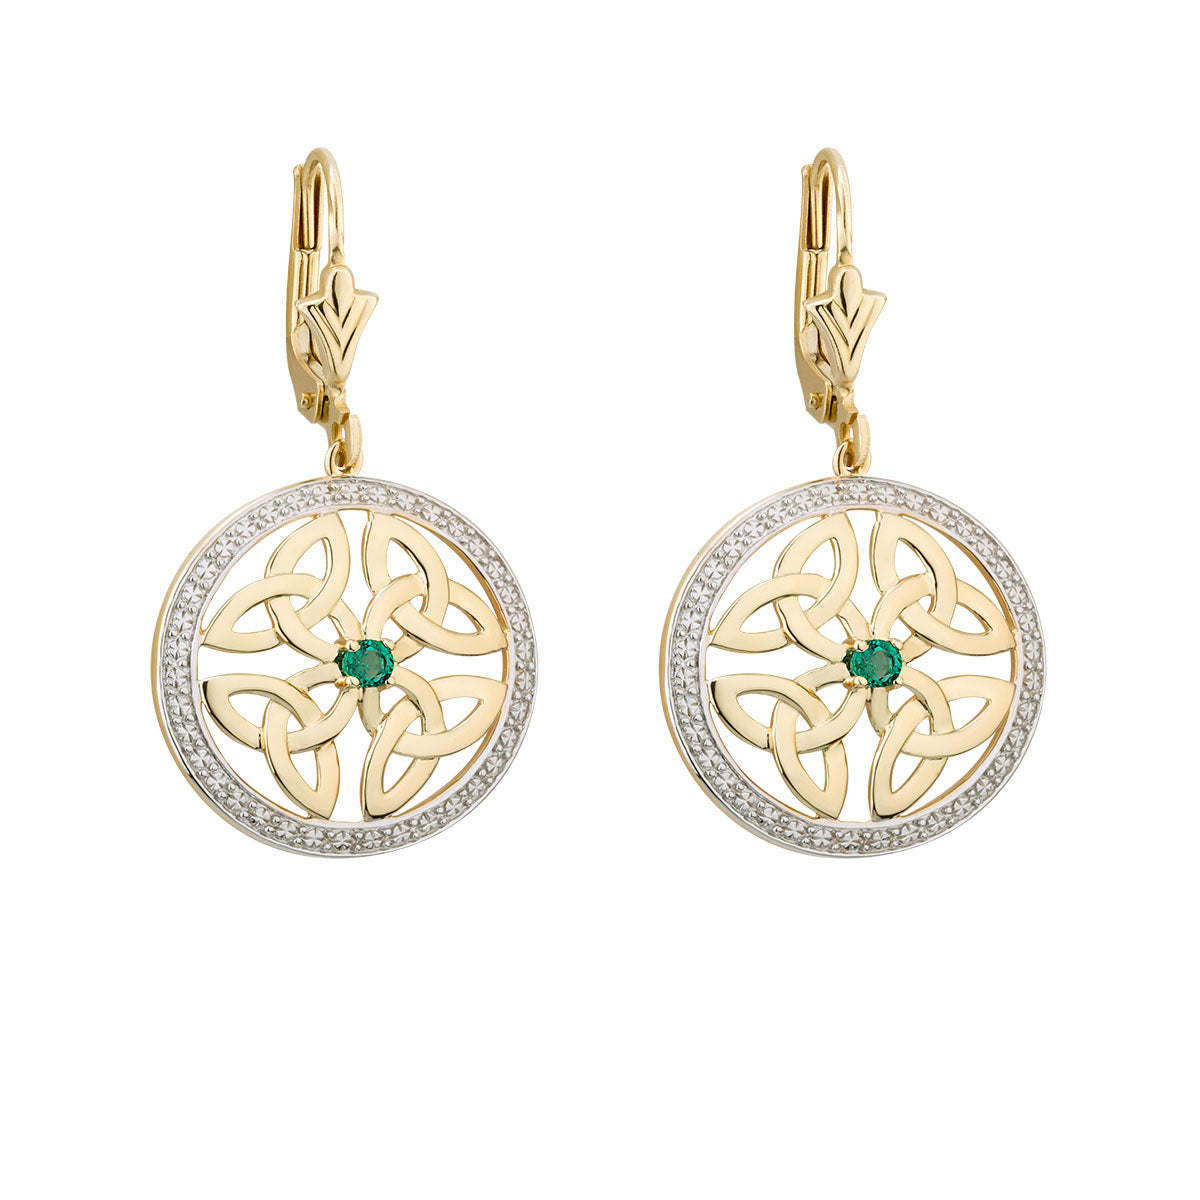 14K gold emerald round trinity knot earrings s33951 from Solvar